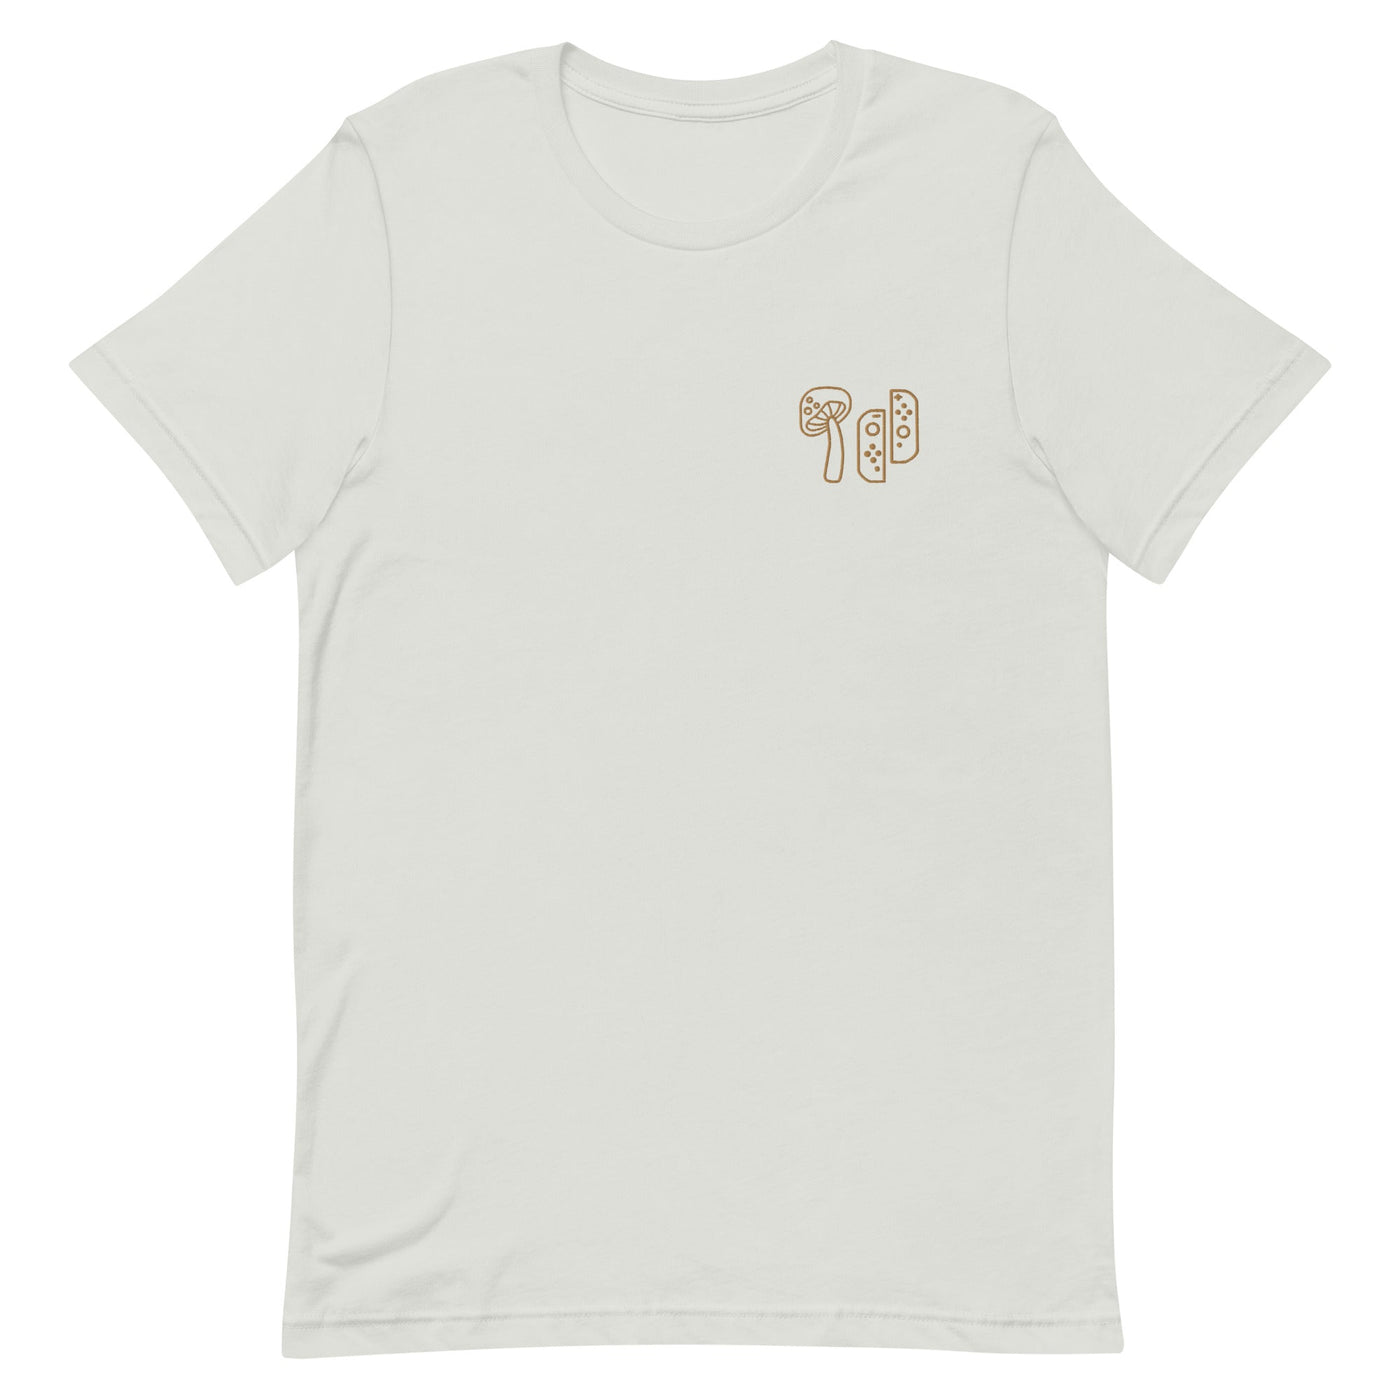 Mushroom & Switch | Embroidered Unisex t-shirt | Cozy Gamer Threads and Thistles Inventory Silver S 